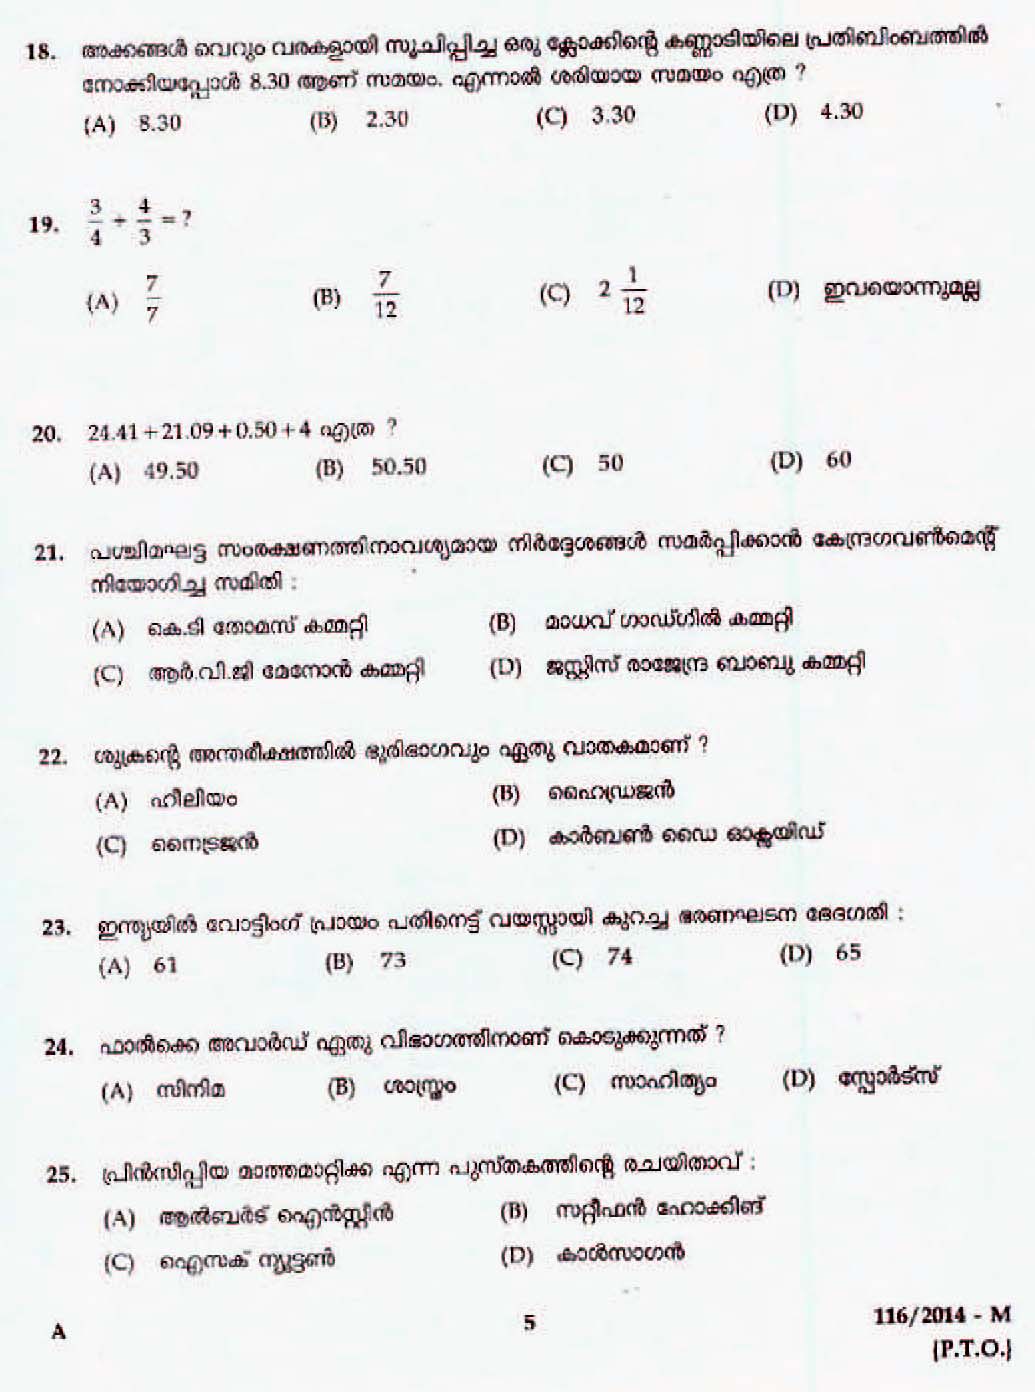 LD Clerk Various All Districts Question Paper Malayalam 2014 Paper Code 1162014 M 3